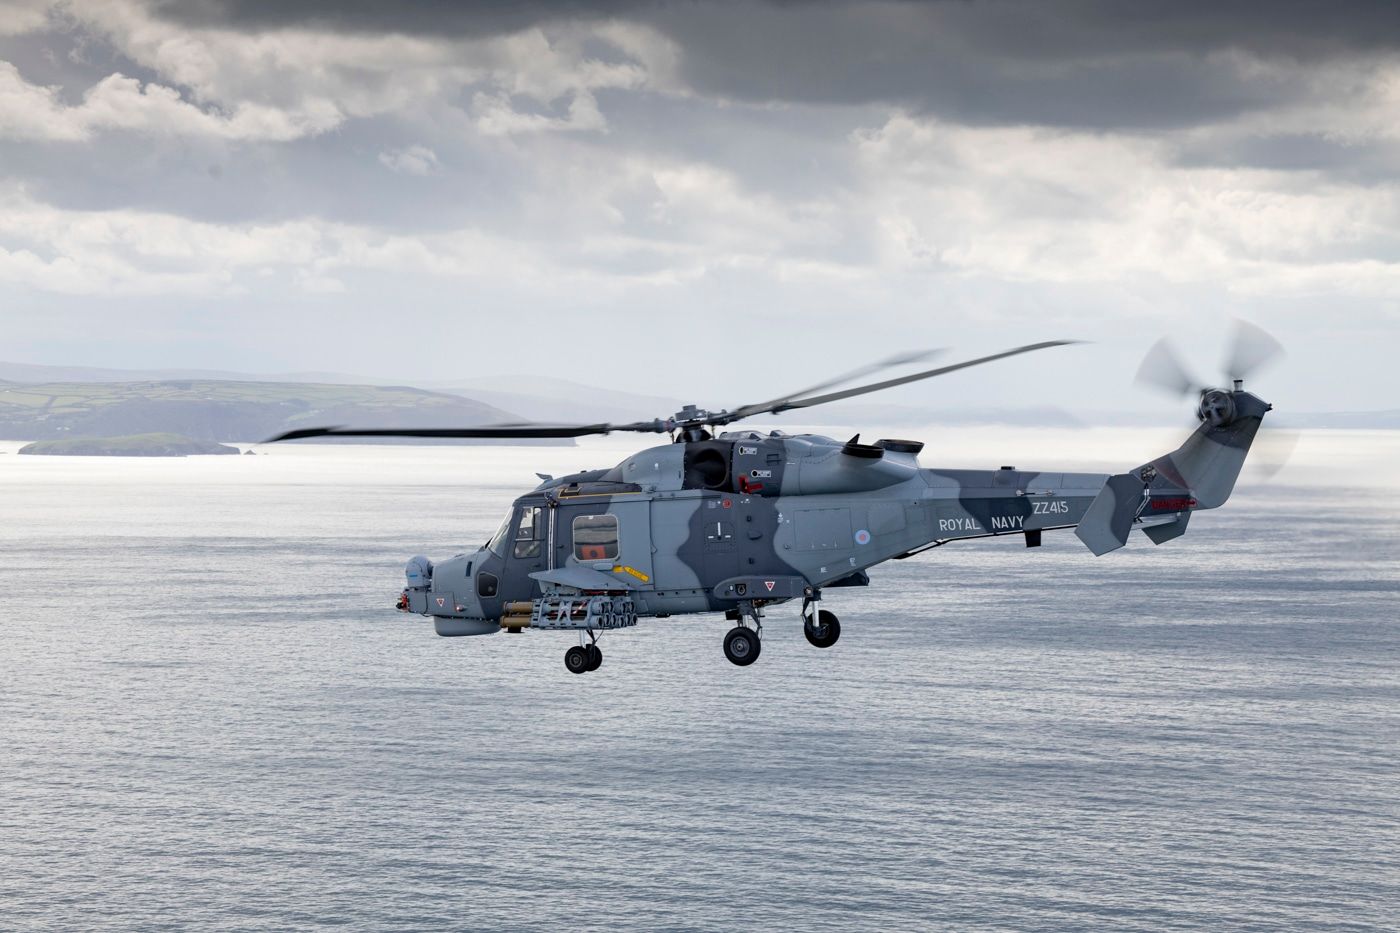 Royal Navy Wildcat Completed SHOL Trials